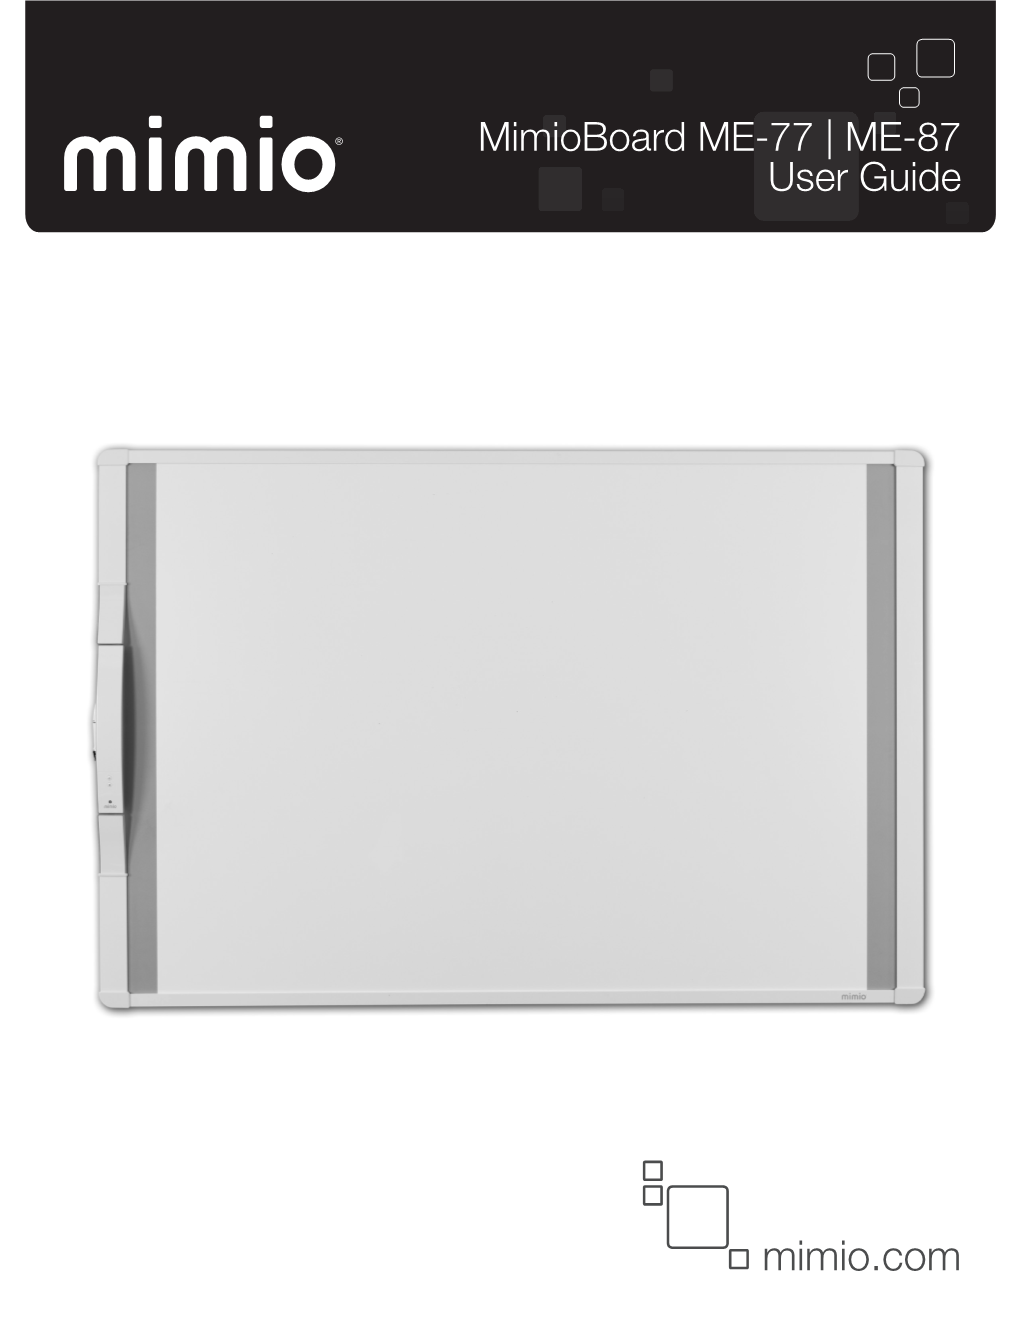 Mimioboard User Guide